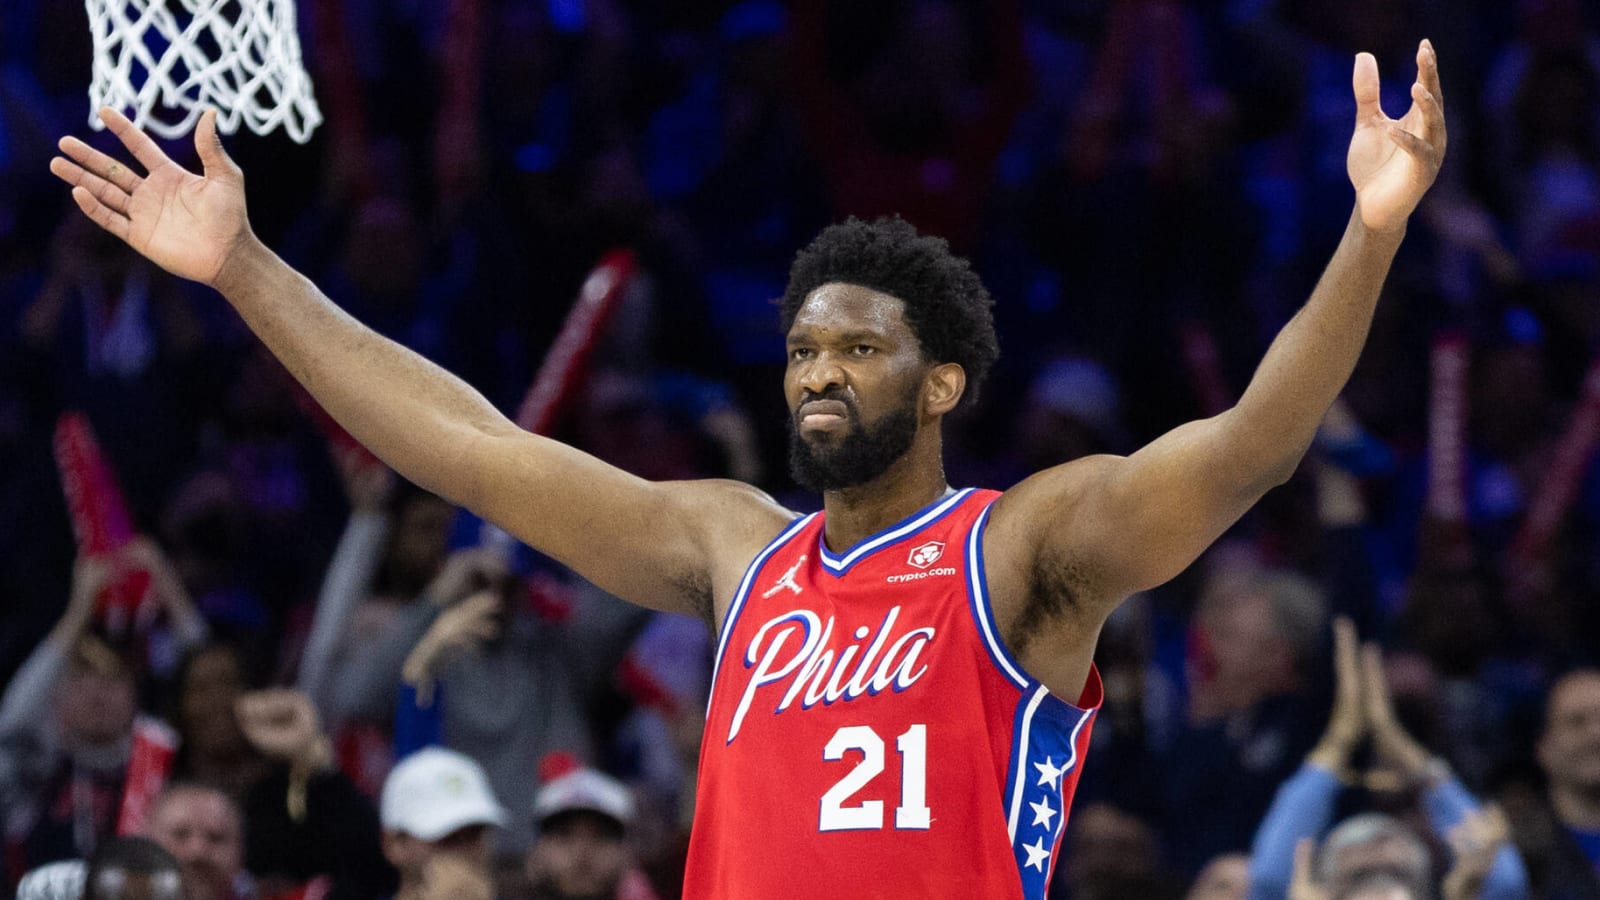 Embiid says he told Nick Nurse to stop complaining about calls